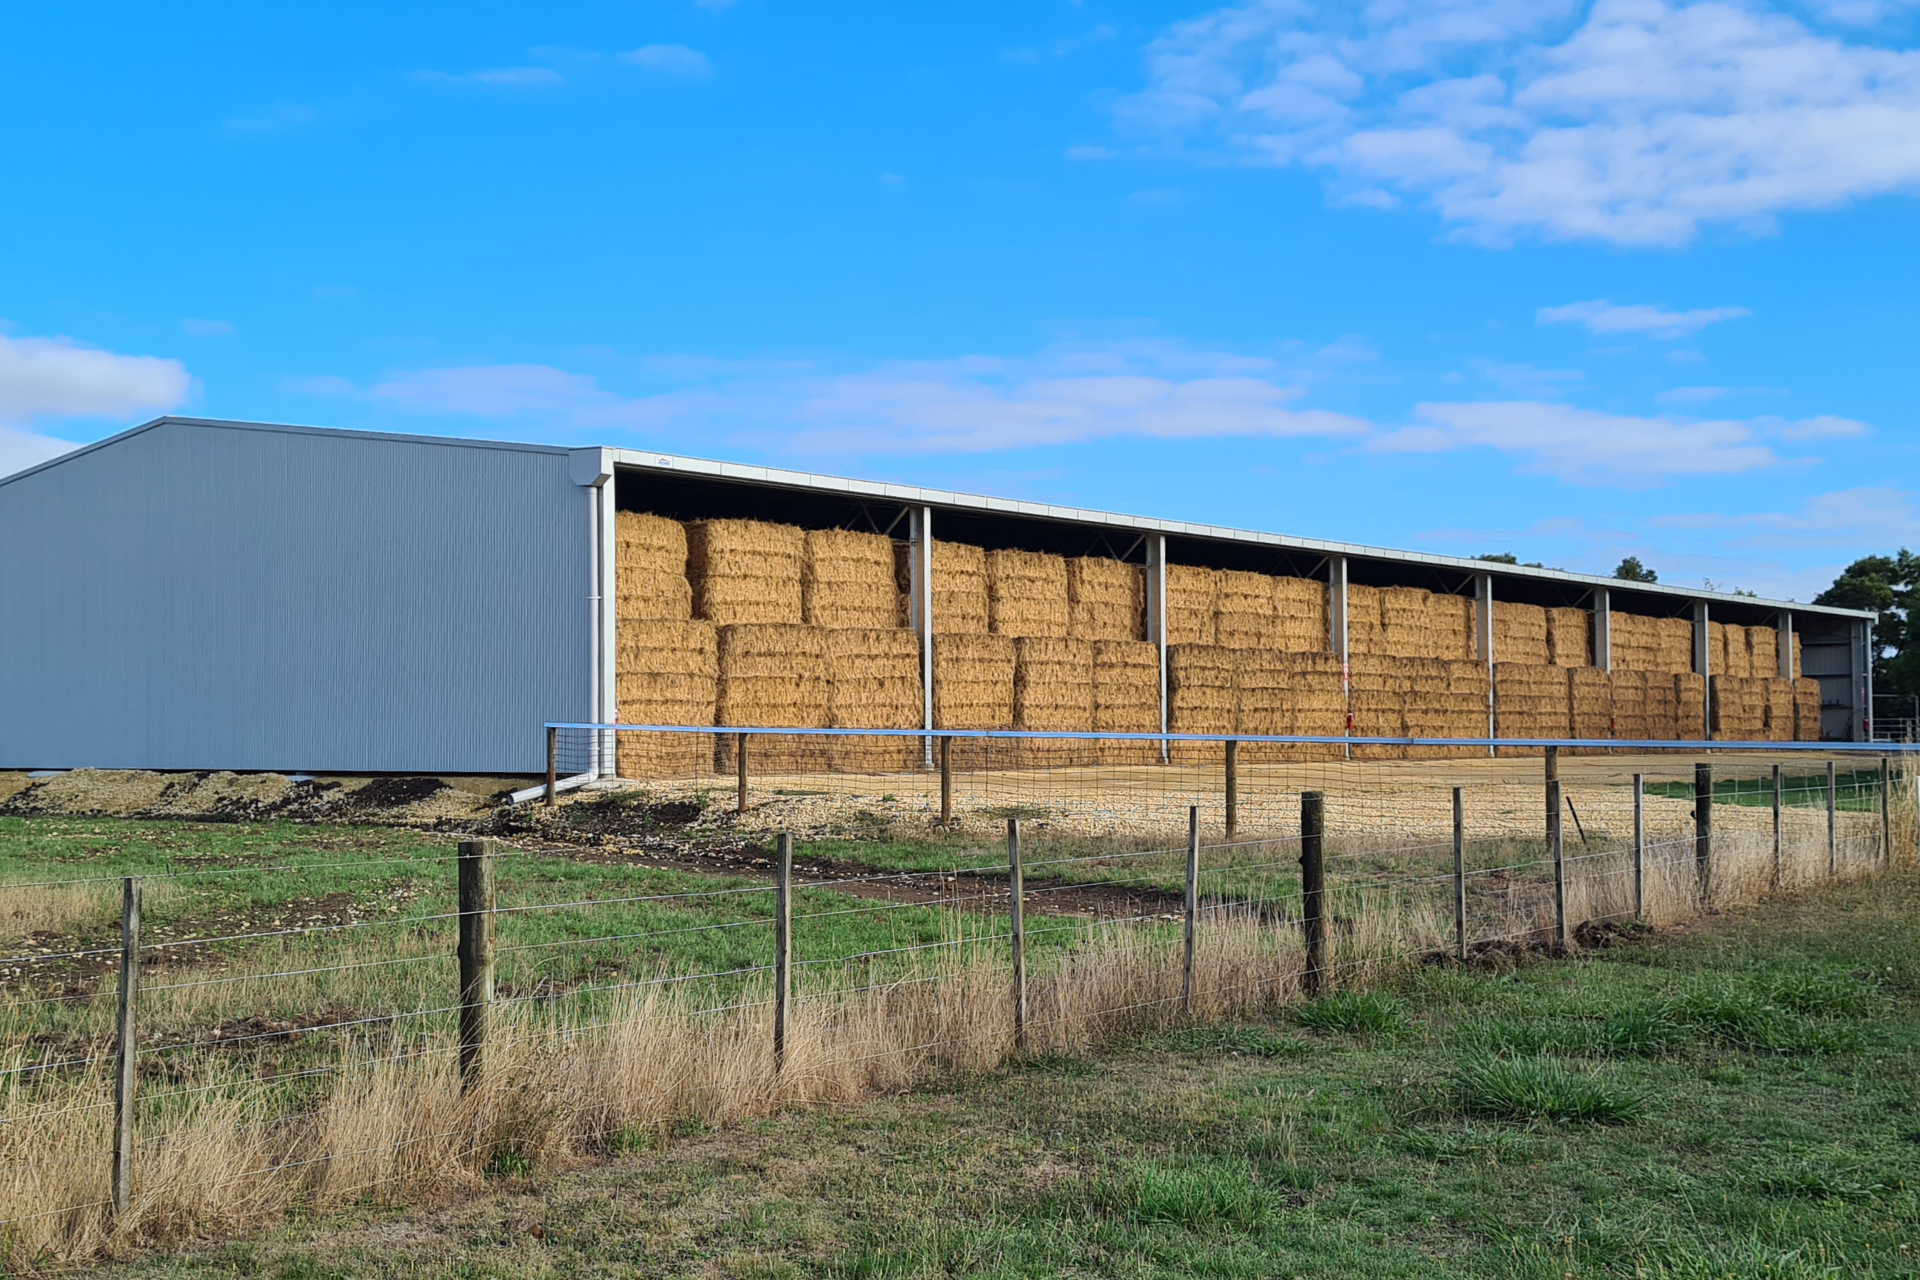 A 64m x 24m x 5m hay shed at Wallacedale VIC